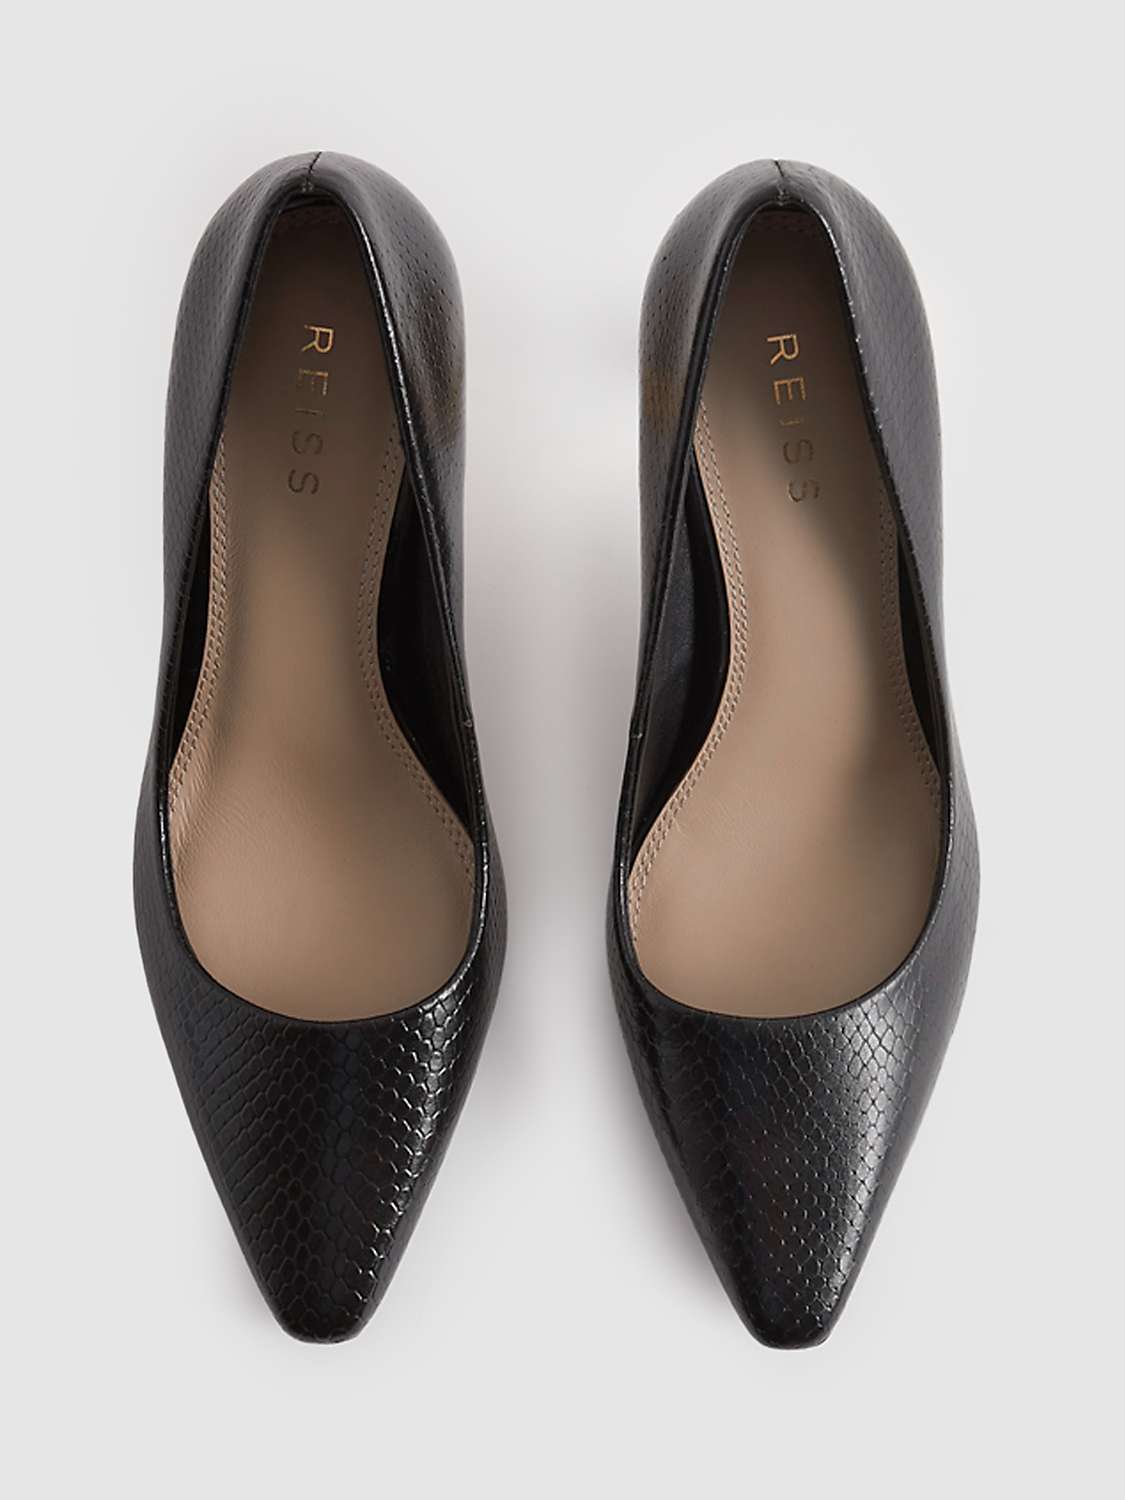 Buy Reiss Monroe Leather Angled Heel Court Shoes, Black Online at johnlewis.com